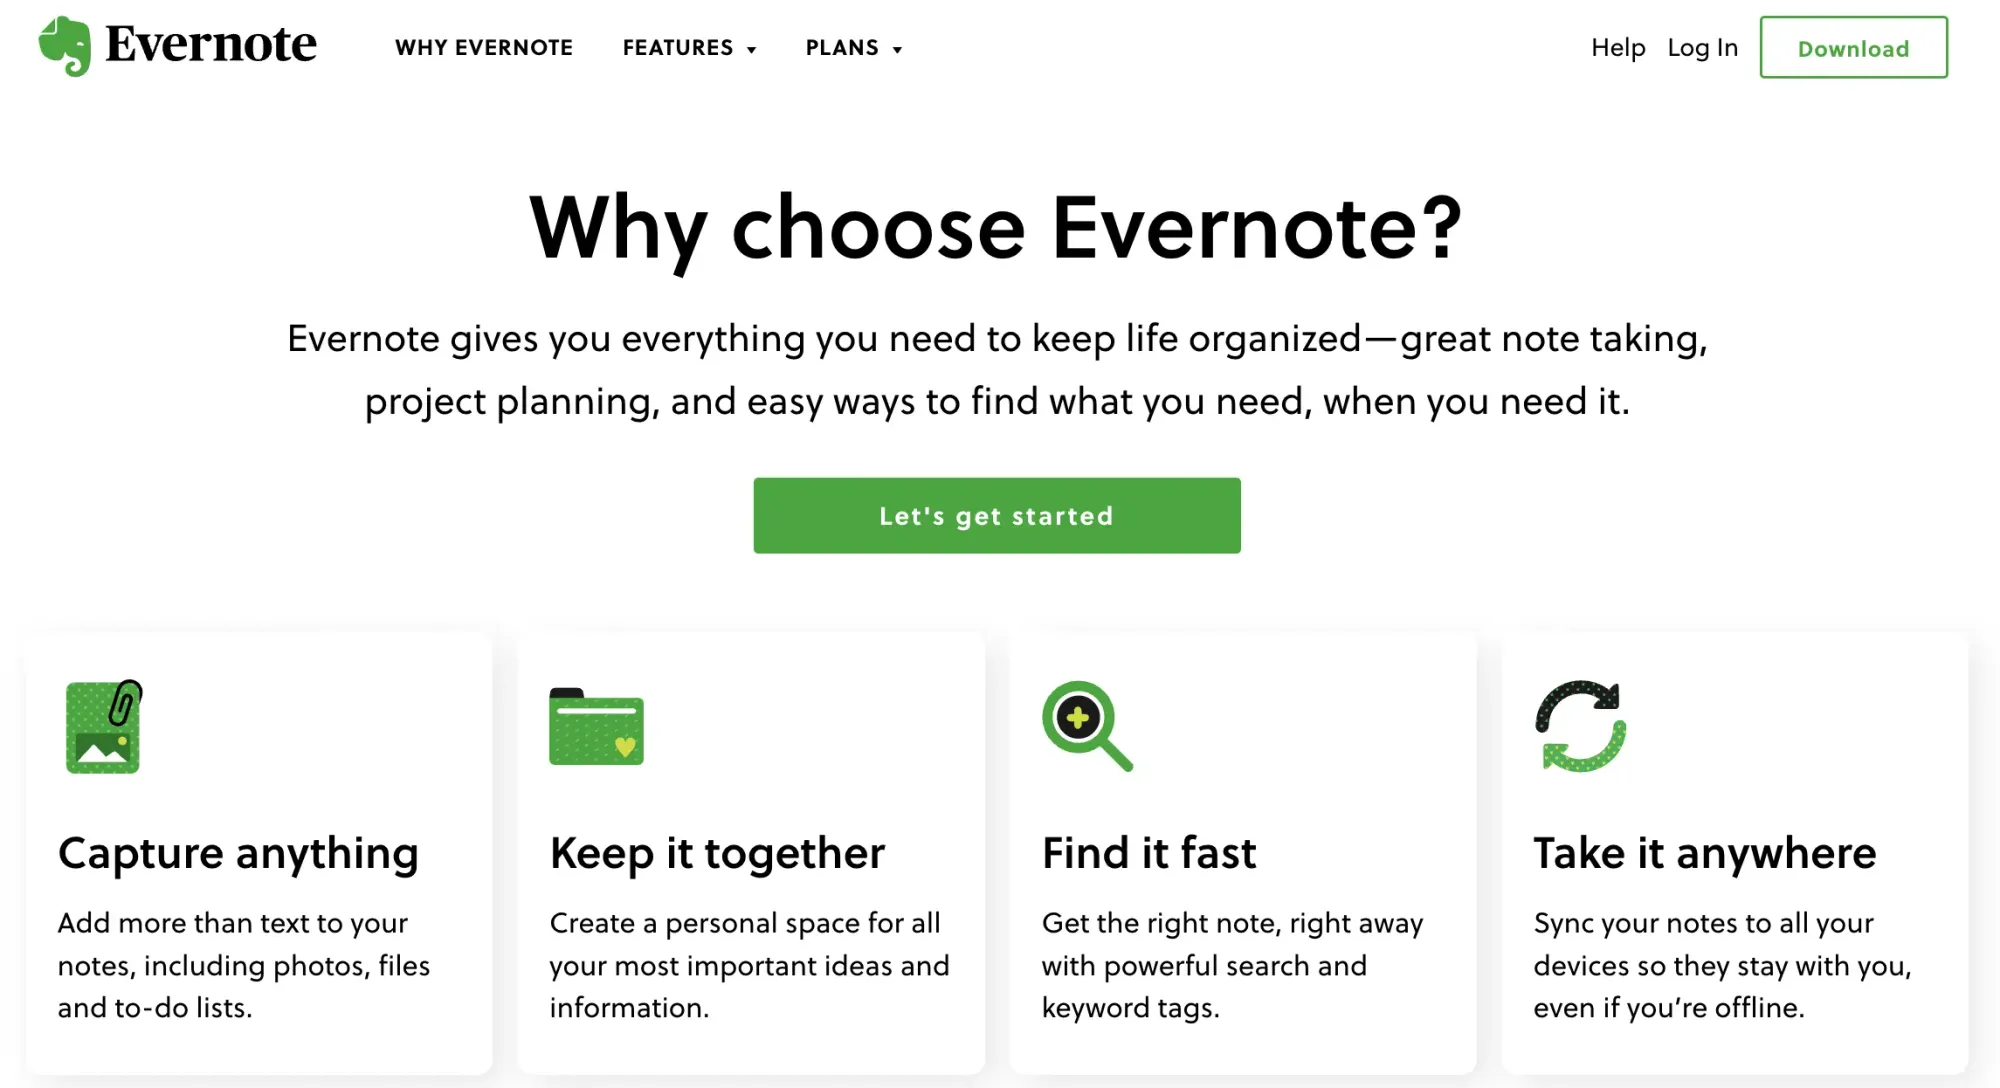 What is Evernote Used For?